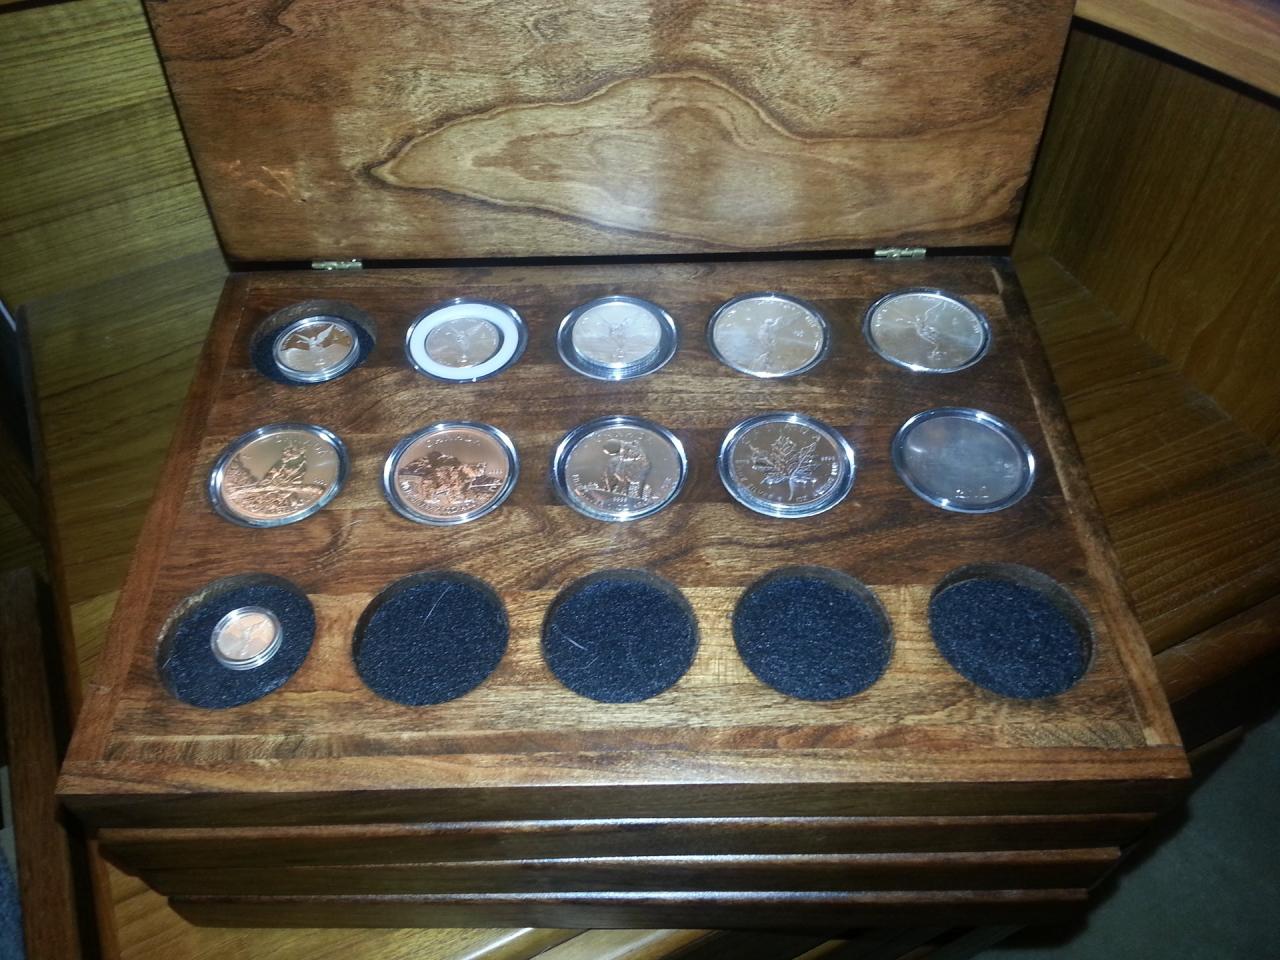 Let's see your custom coin storage or chest Coin Talk